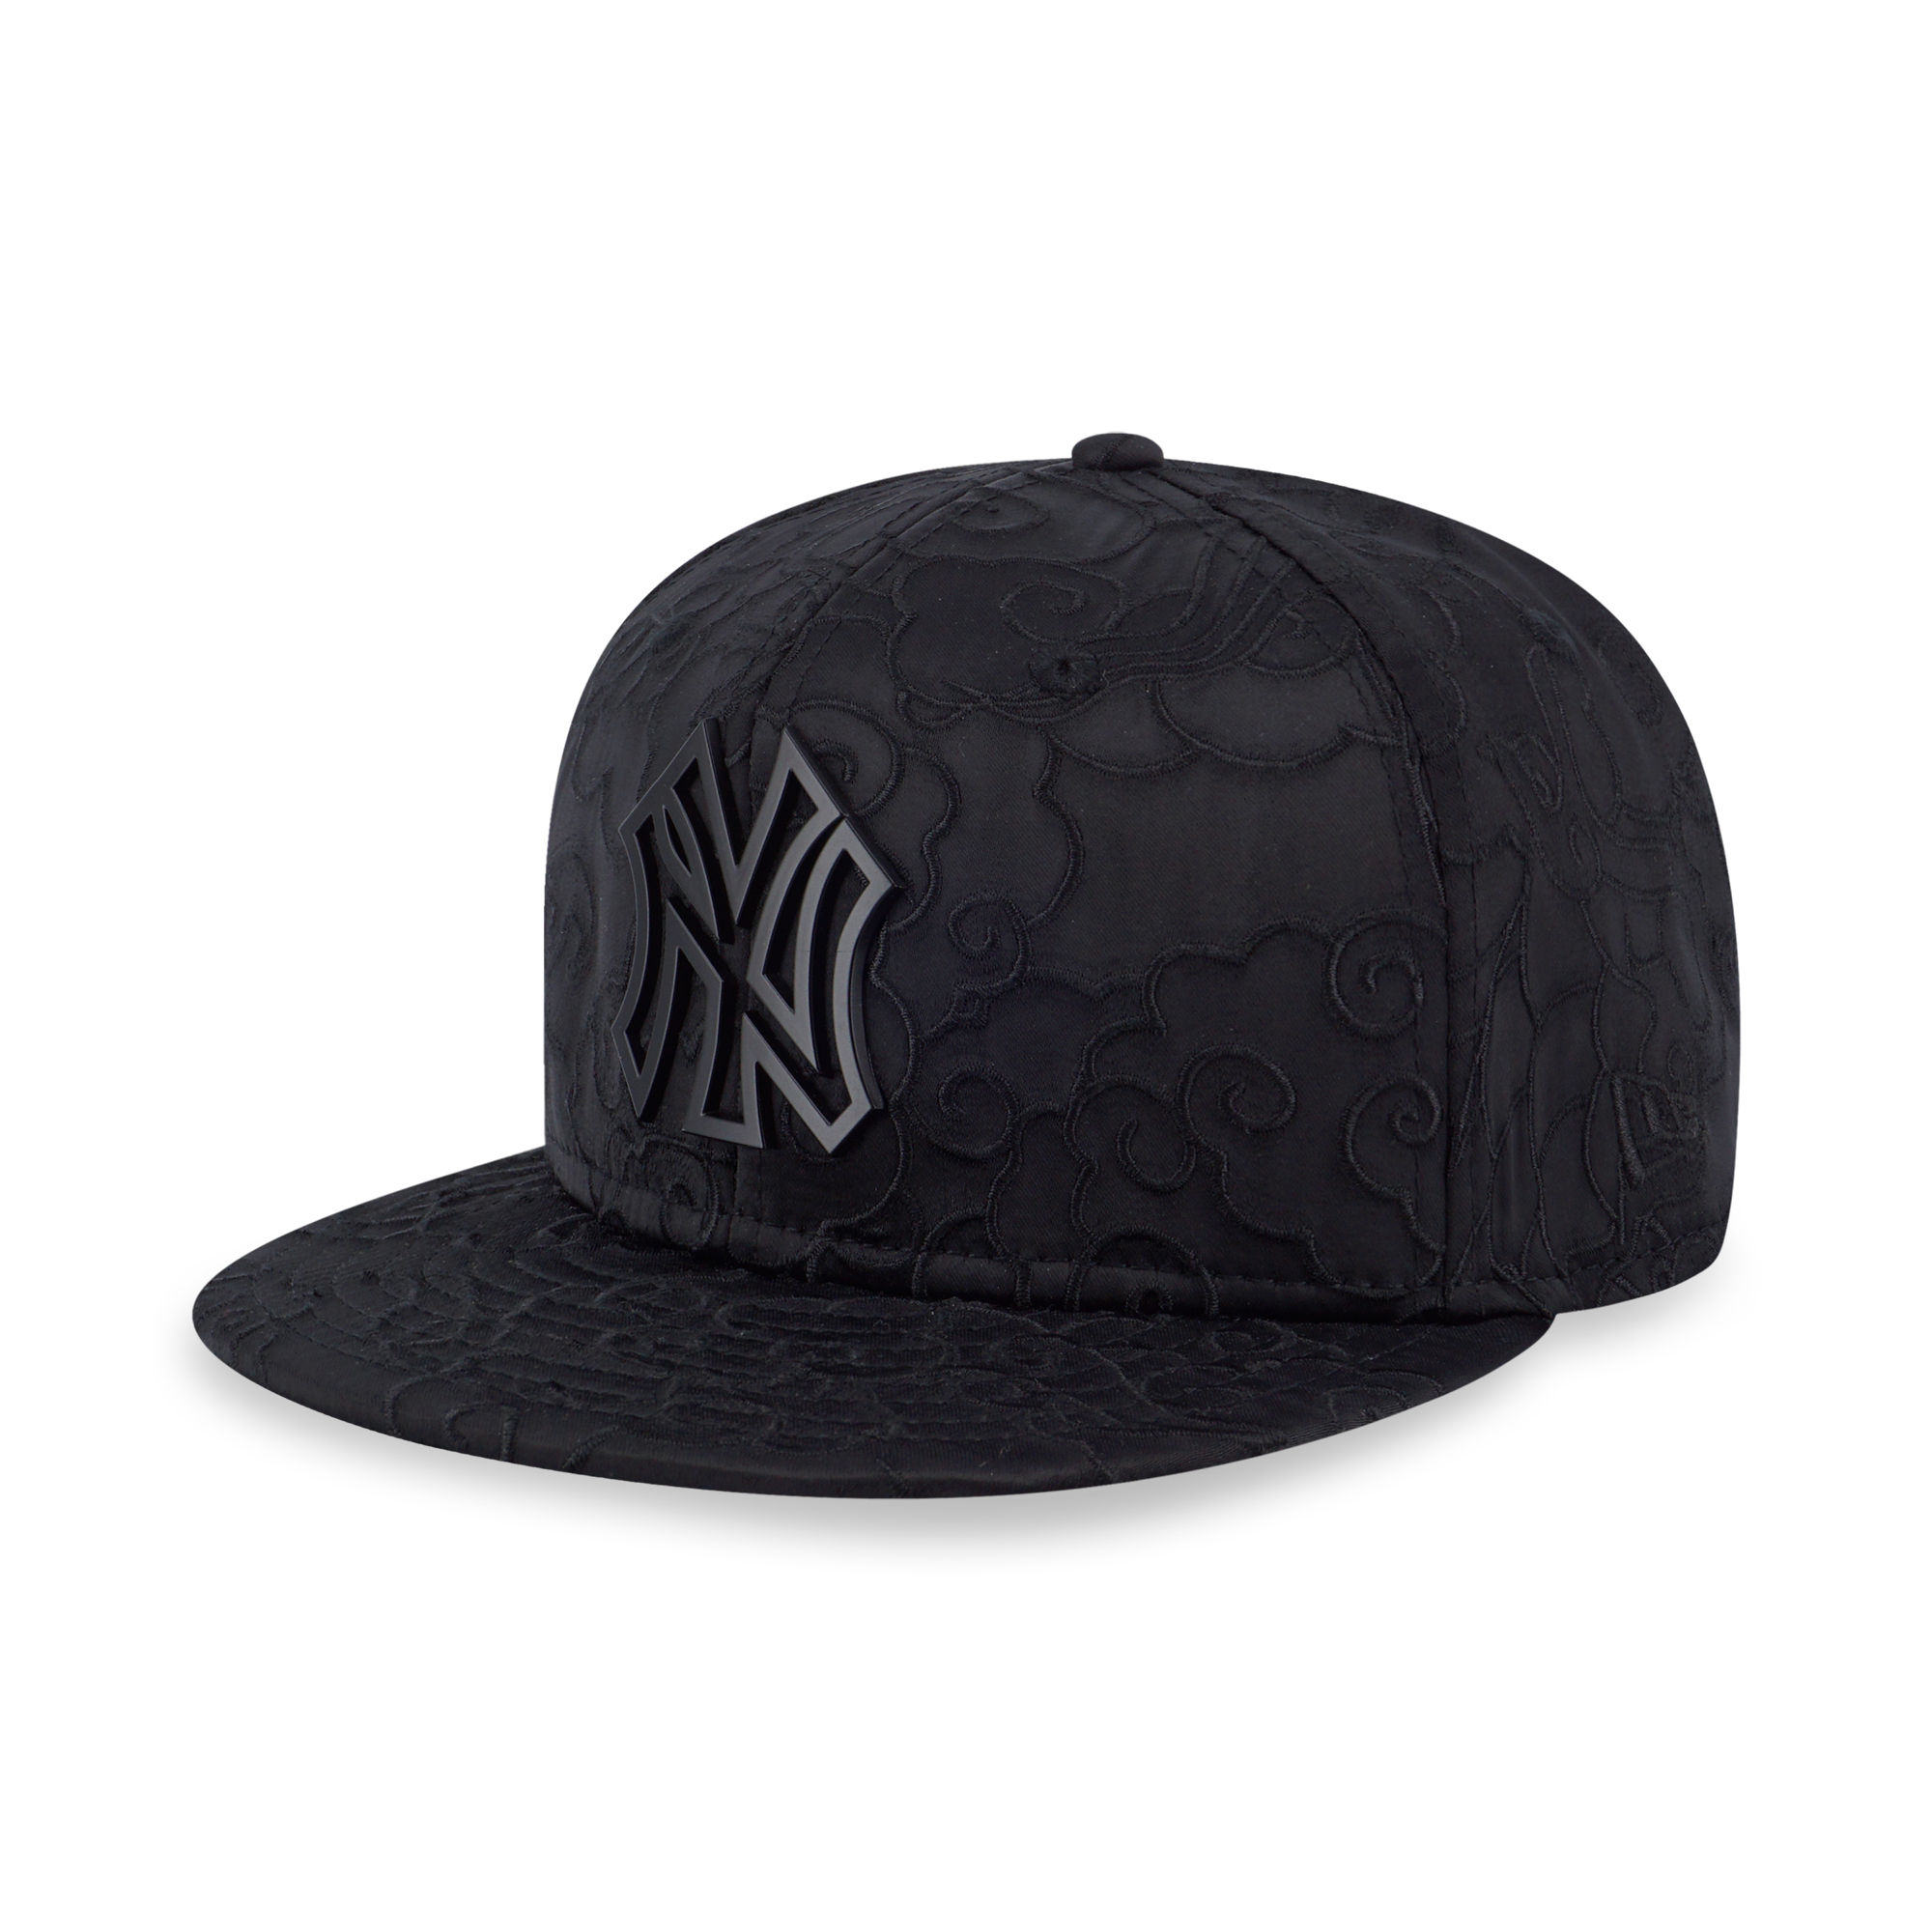 NEW YORK YANKEES YEAR OF THE DRAGON BLACK ALL OVER PRINT KIDS 9FIFTY CAP